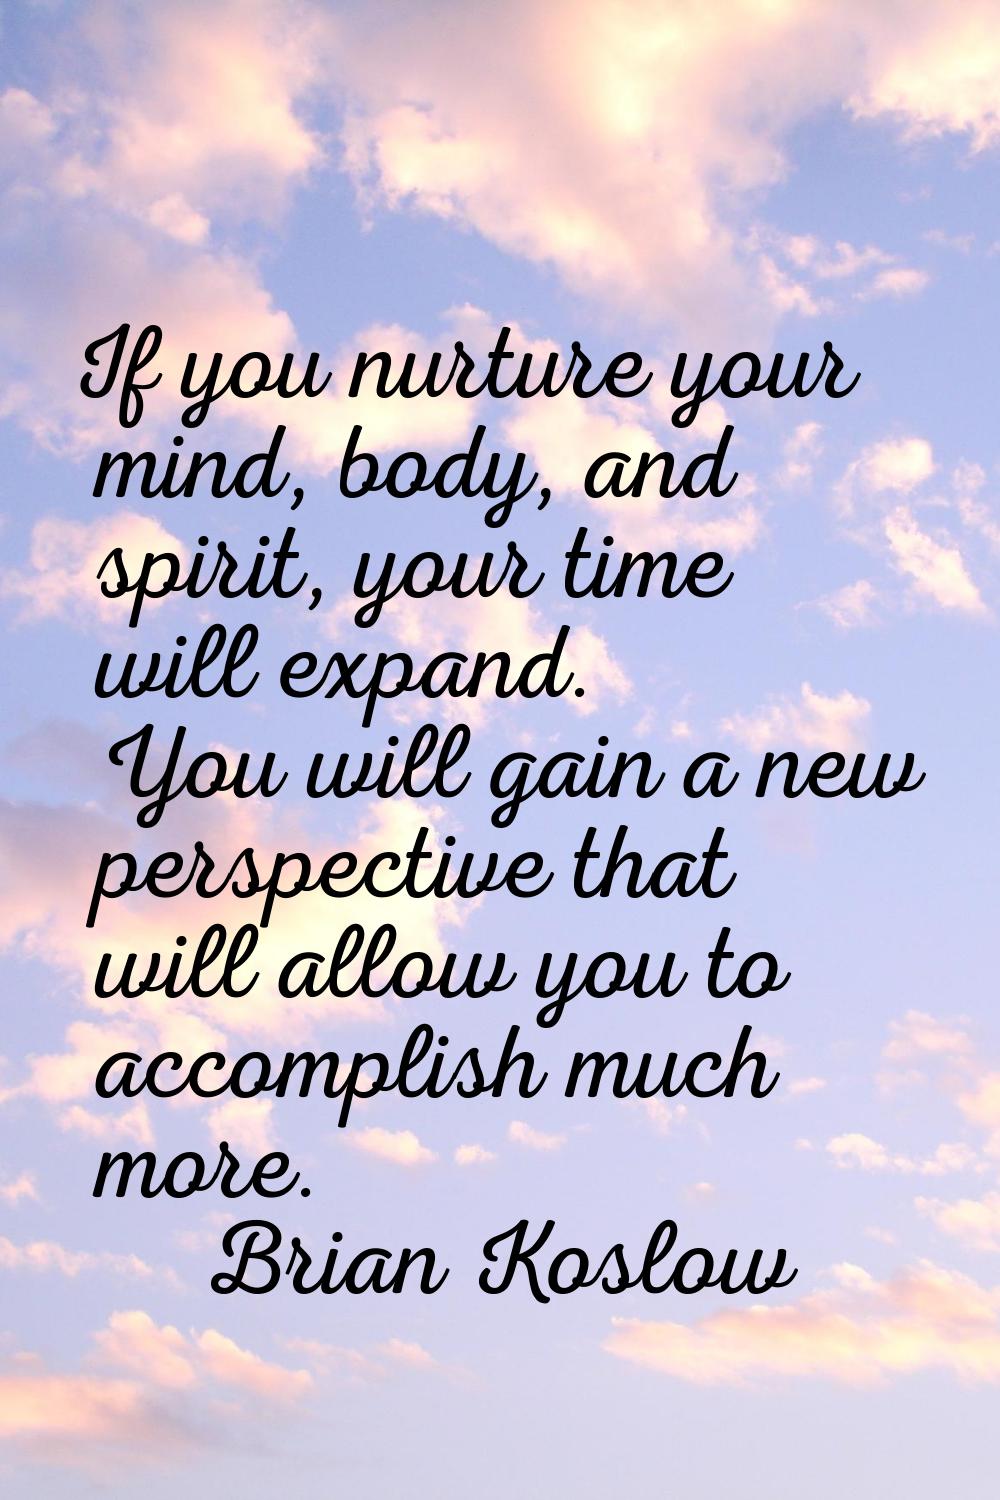 If you nurture your mind, body, and spirit, your time will expand. You will gain a new perspective 